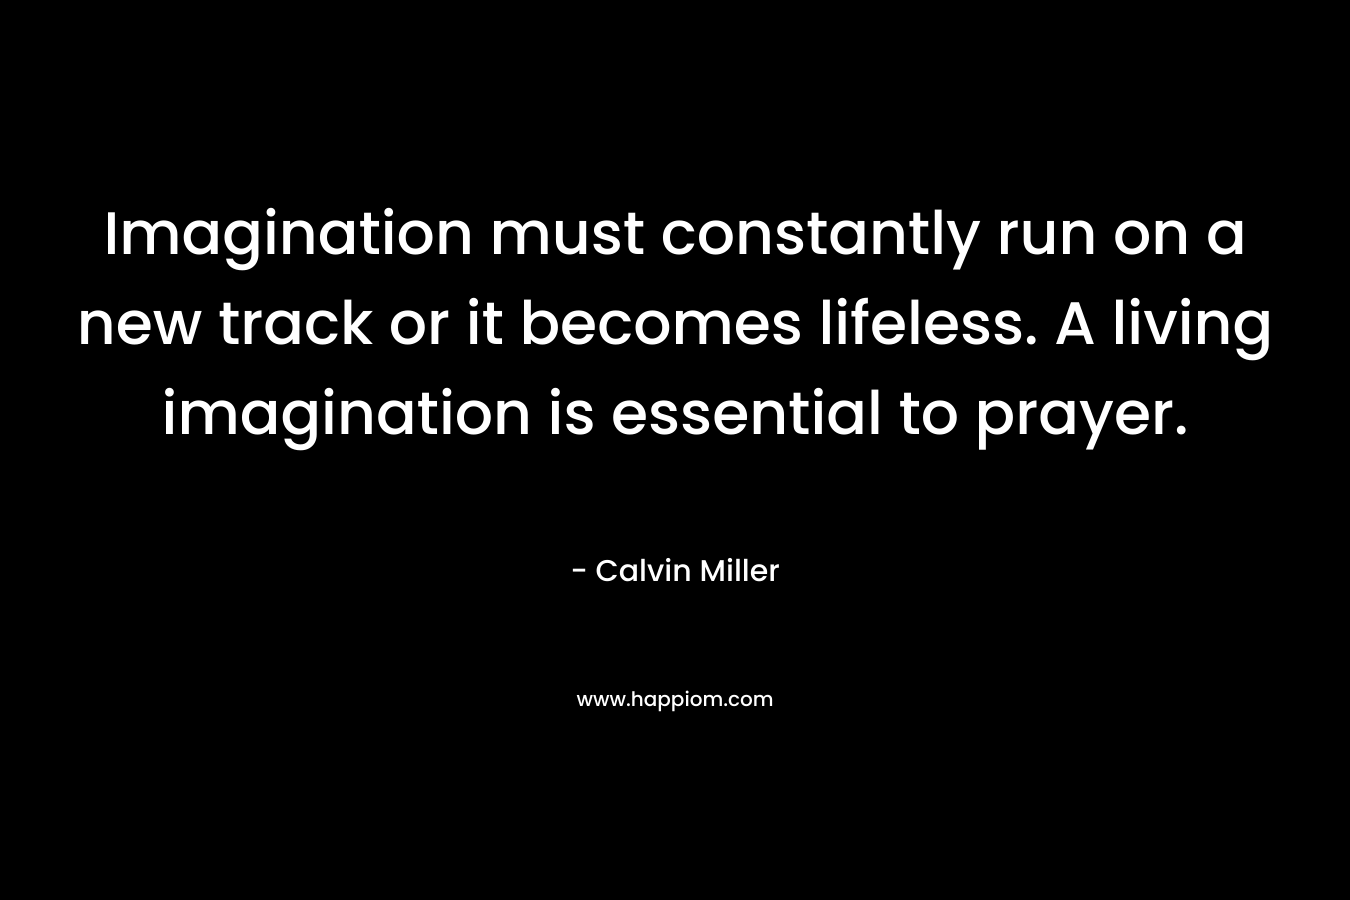 Imagination must constantly run on a new track or it becomes lifeless. A living imagination is essential to prayer.